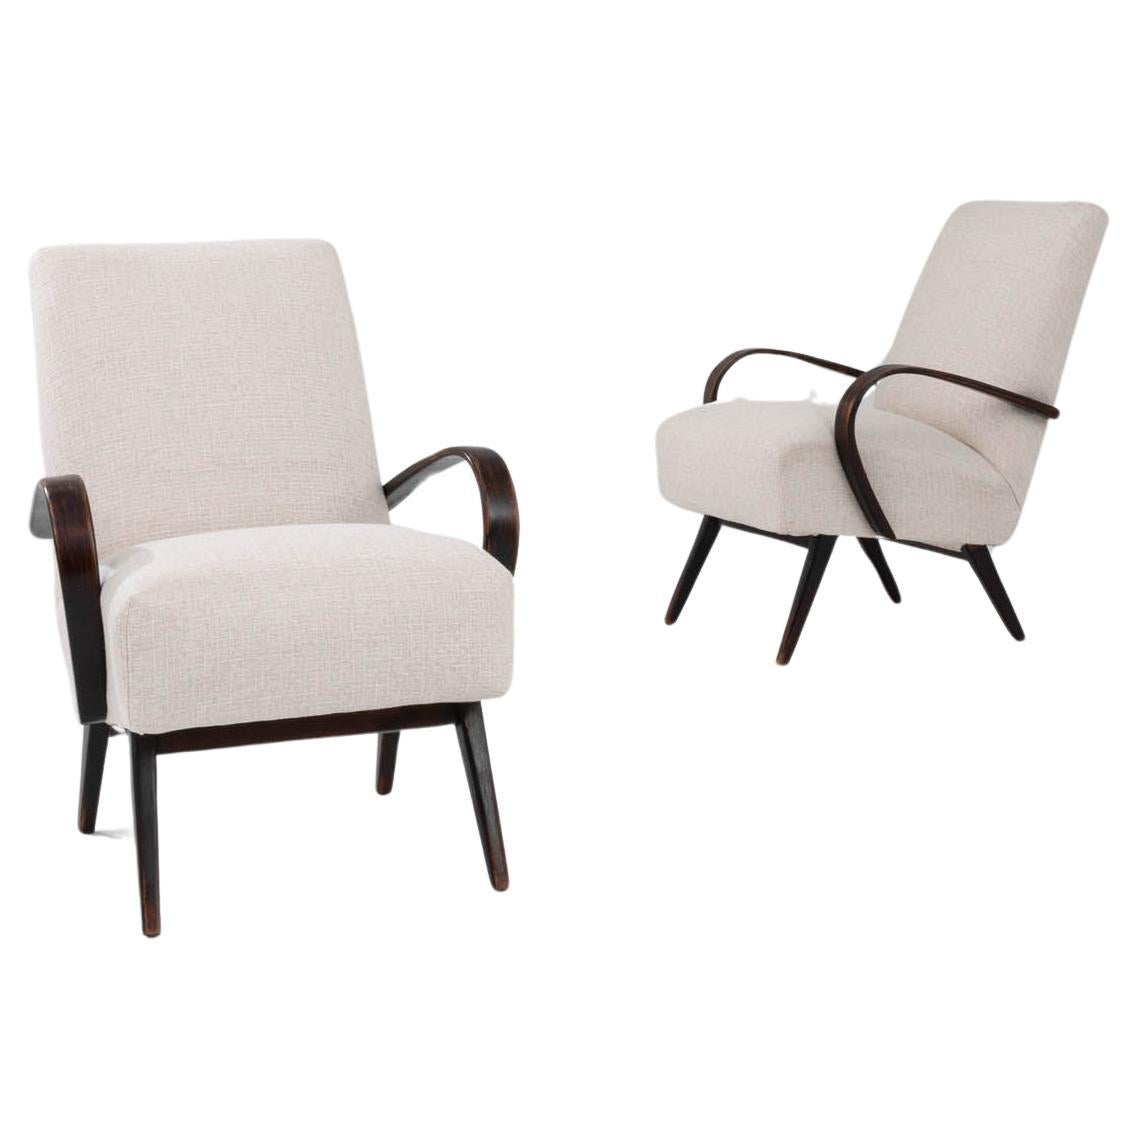 1960s Czech Upholstered Armchairs By J. Halabala, a Pair For Sale